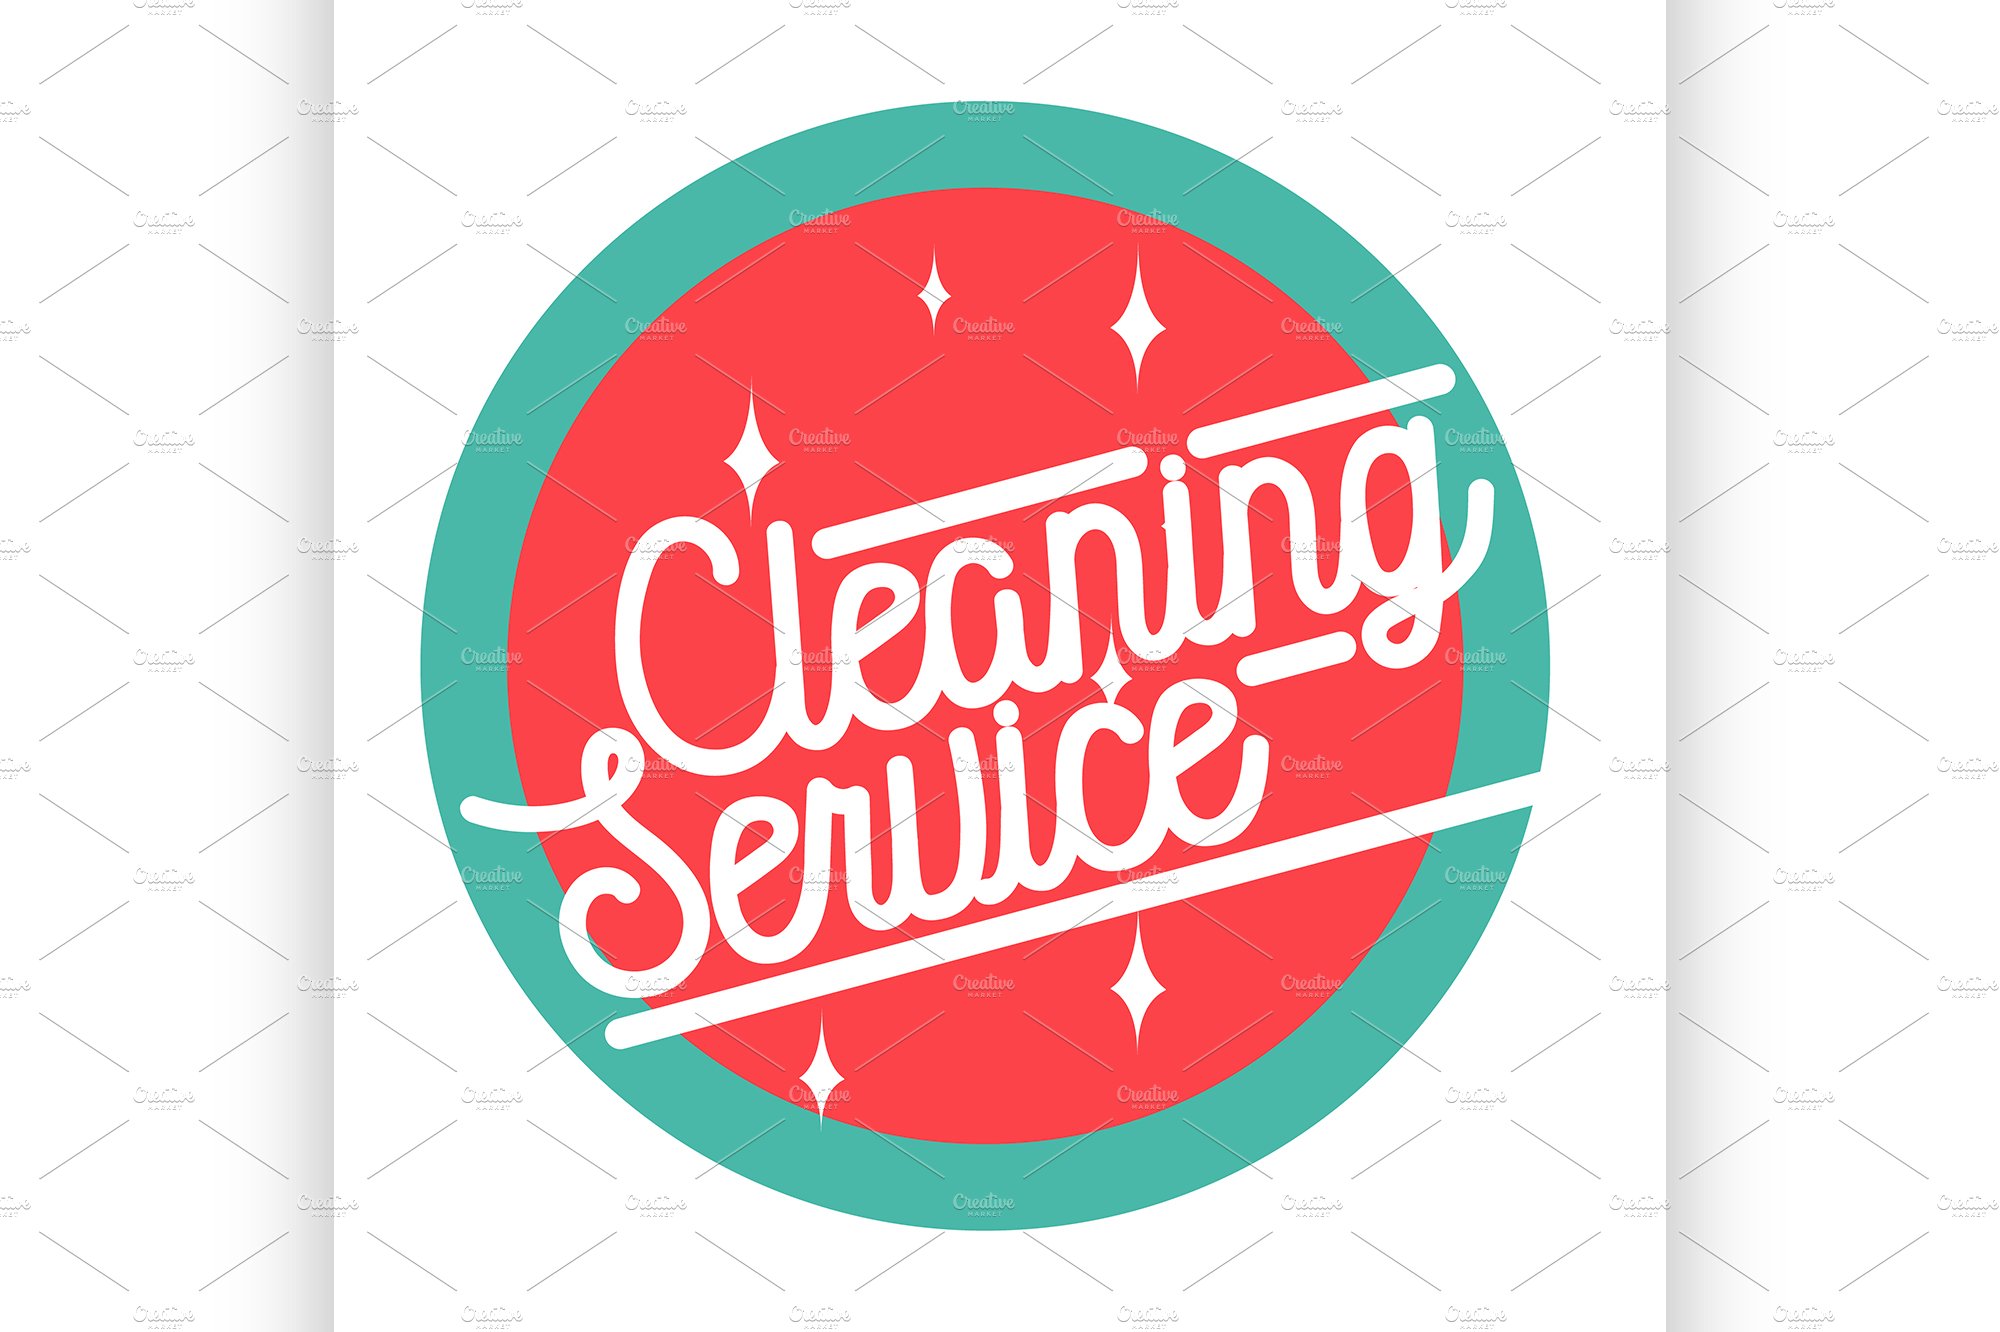 cleaning service emblem cover image.